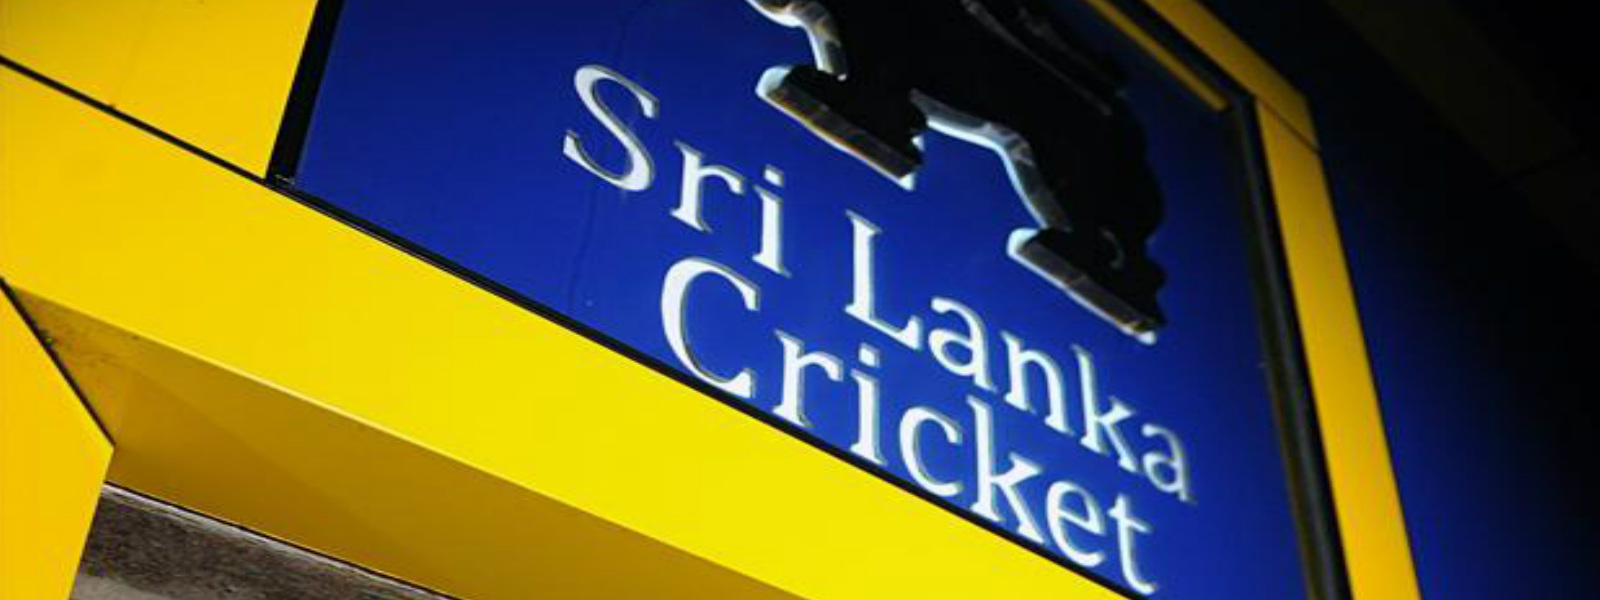 Date fixed for Sri Lanka Cricket elections